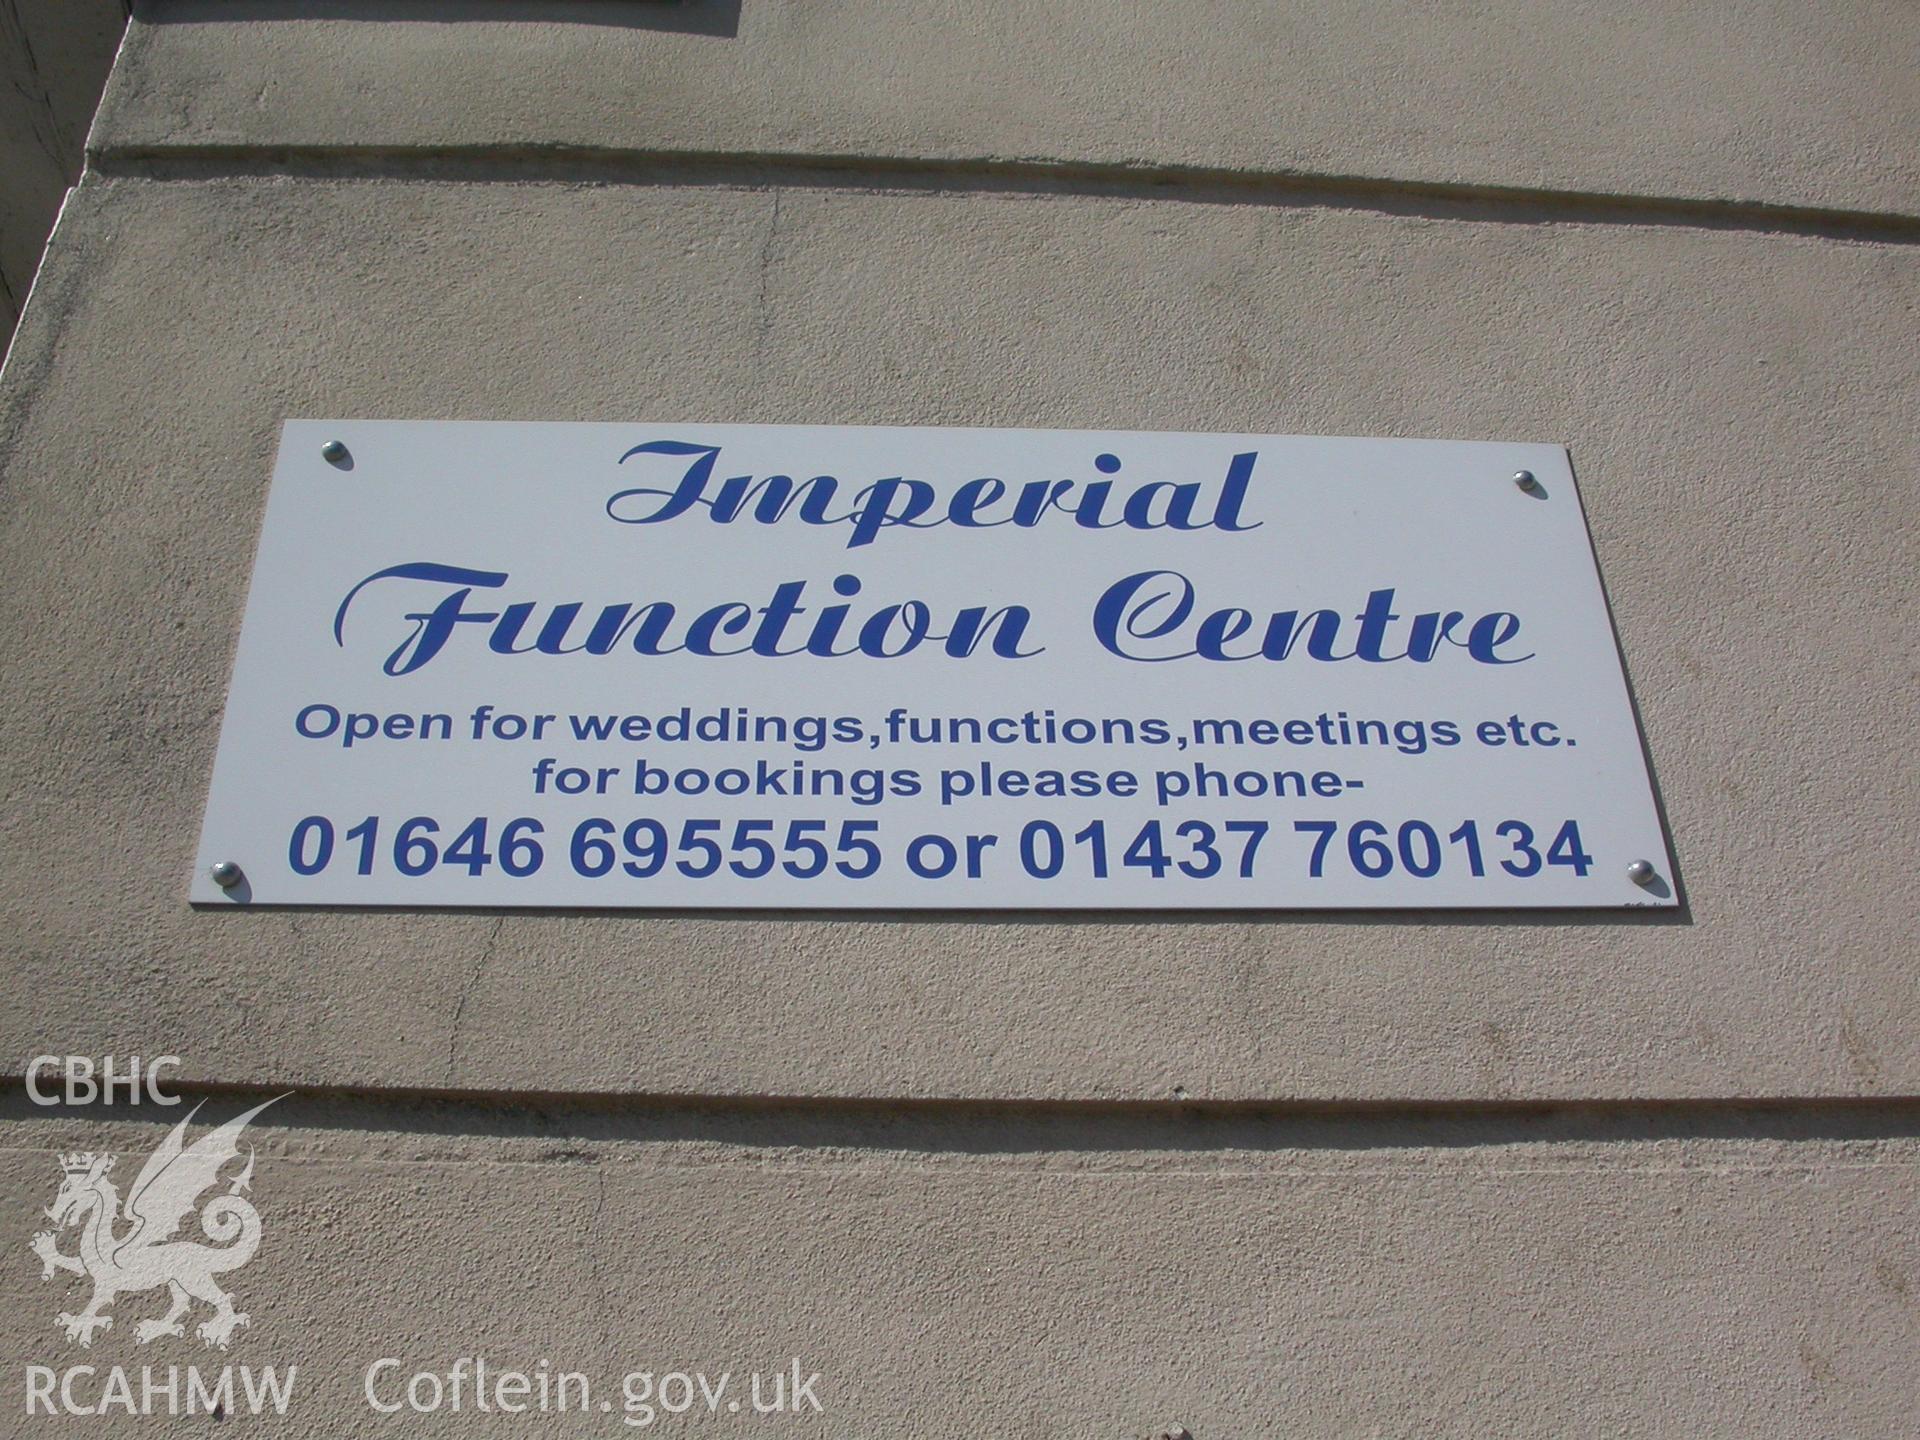 Re-use notice for Imperial Function Centre.